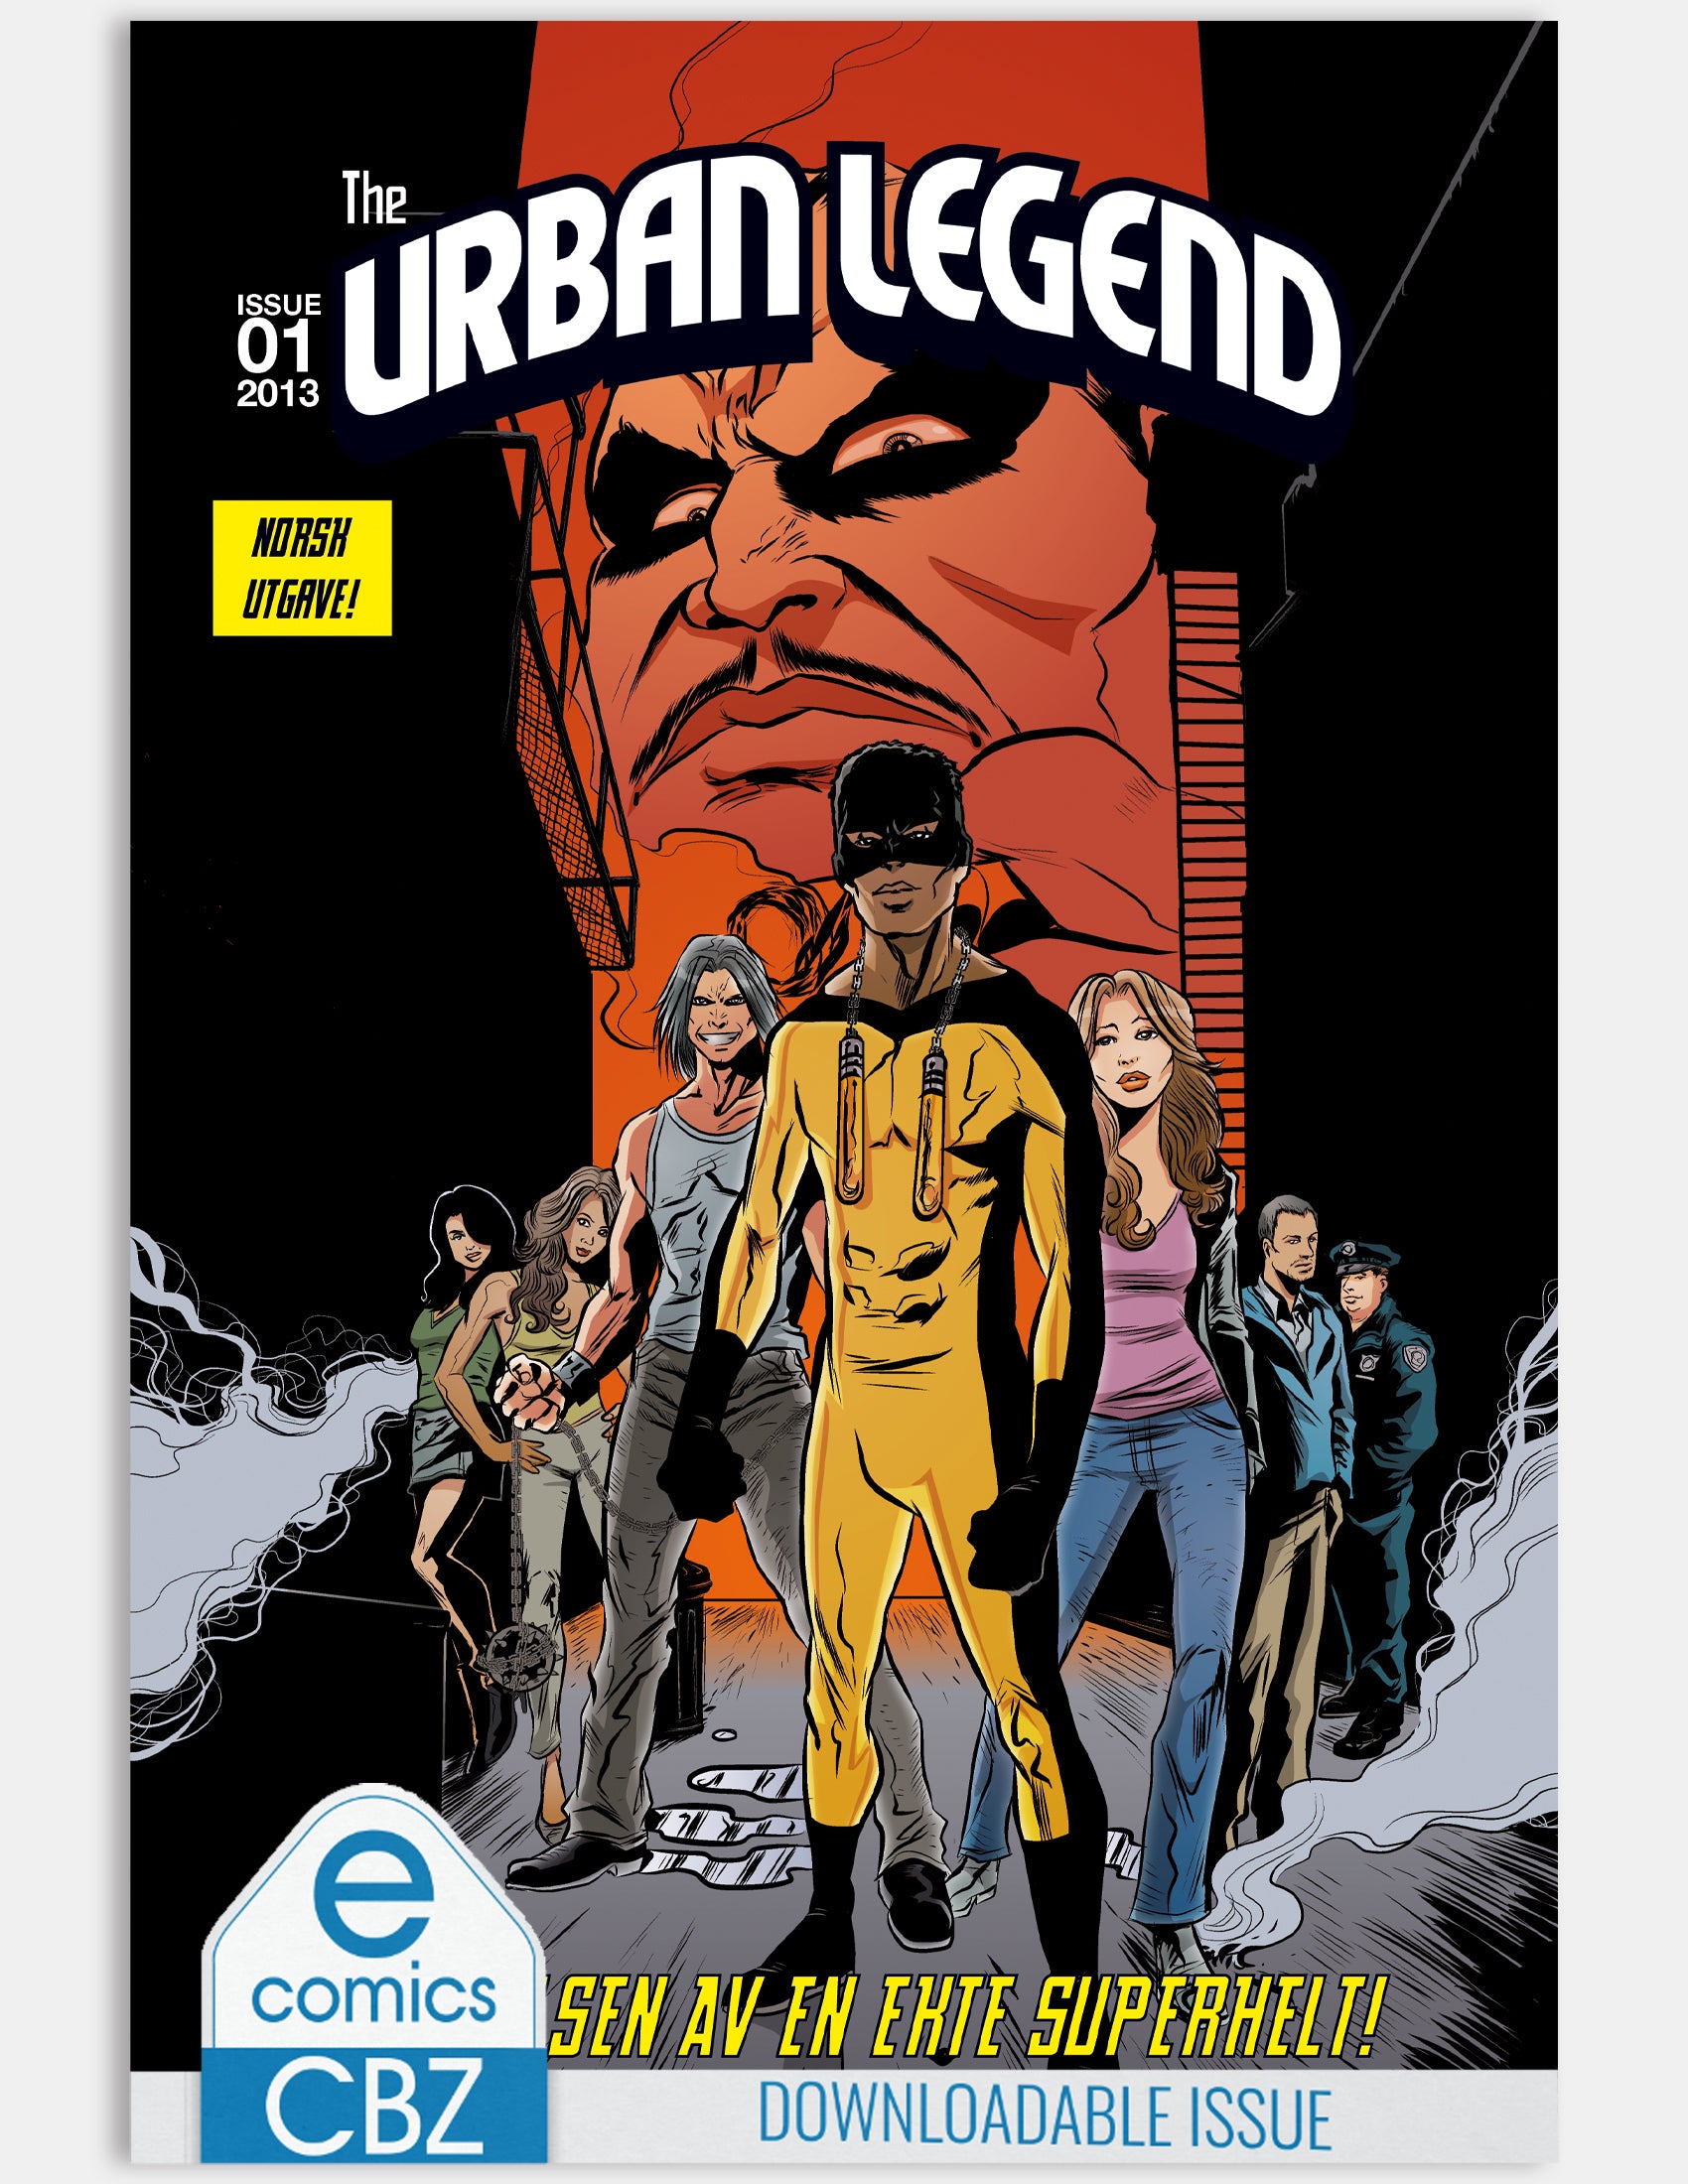 The Urban Legend - A Change Gonna come (Issue 1 - Season 1) - Digital Issue